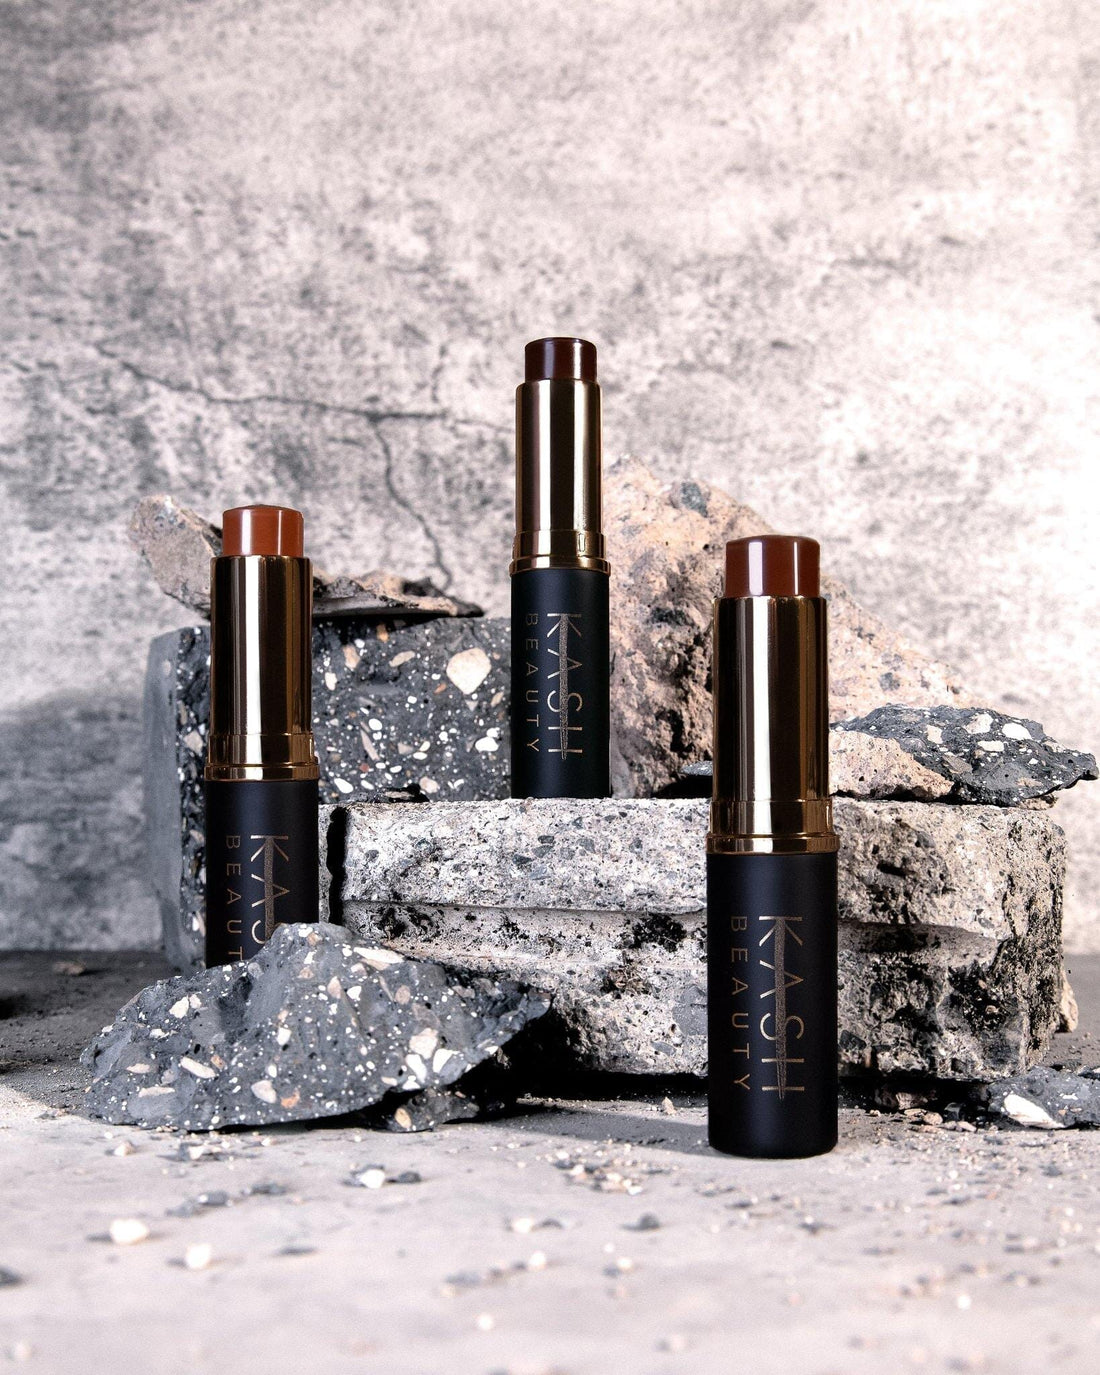 Kash Beauty Sculpt Collection is here to achieve your glow featuring an array of buttery cream sculpting sticks, that impart a natural, glowing sheen onto the skin. - KASH Beauty